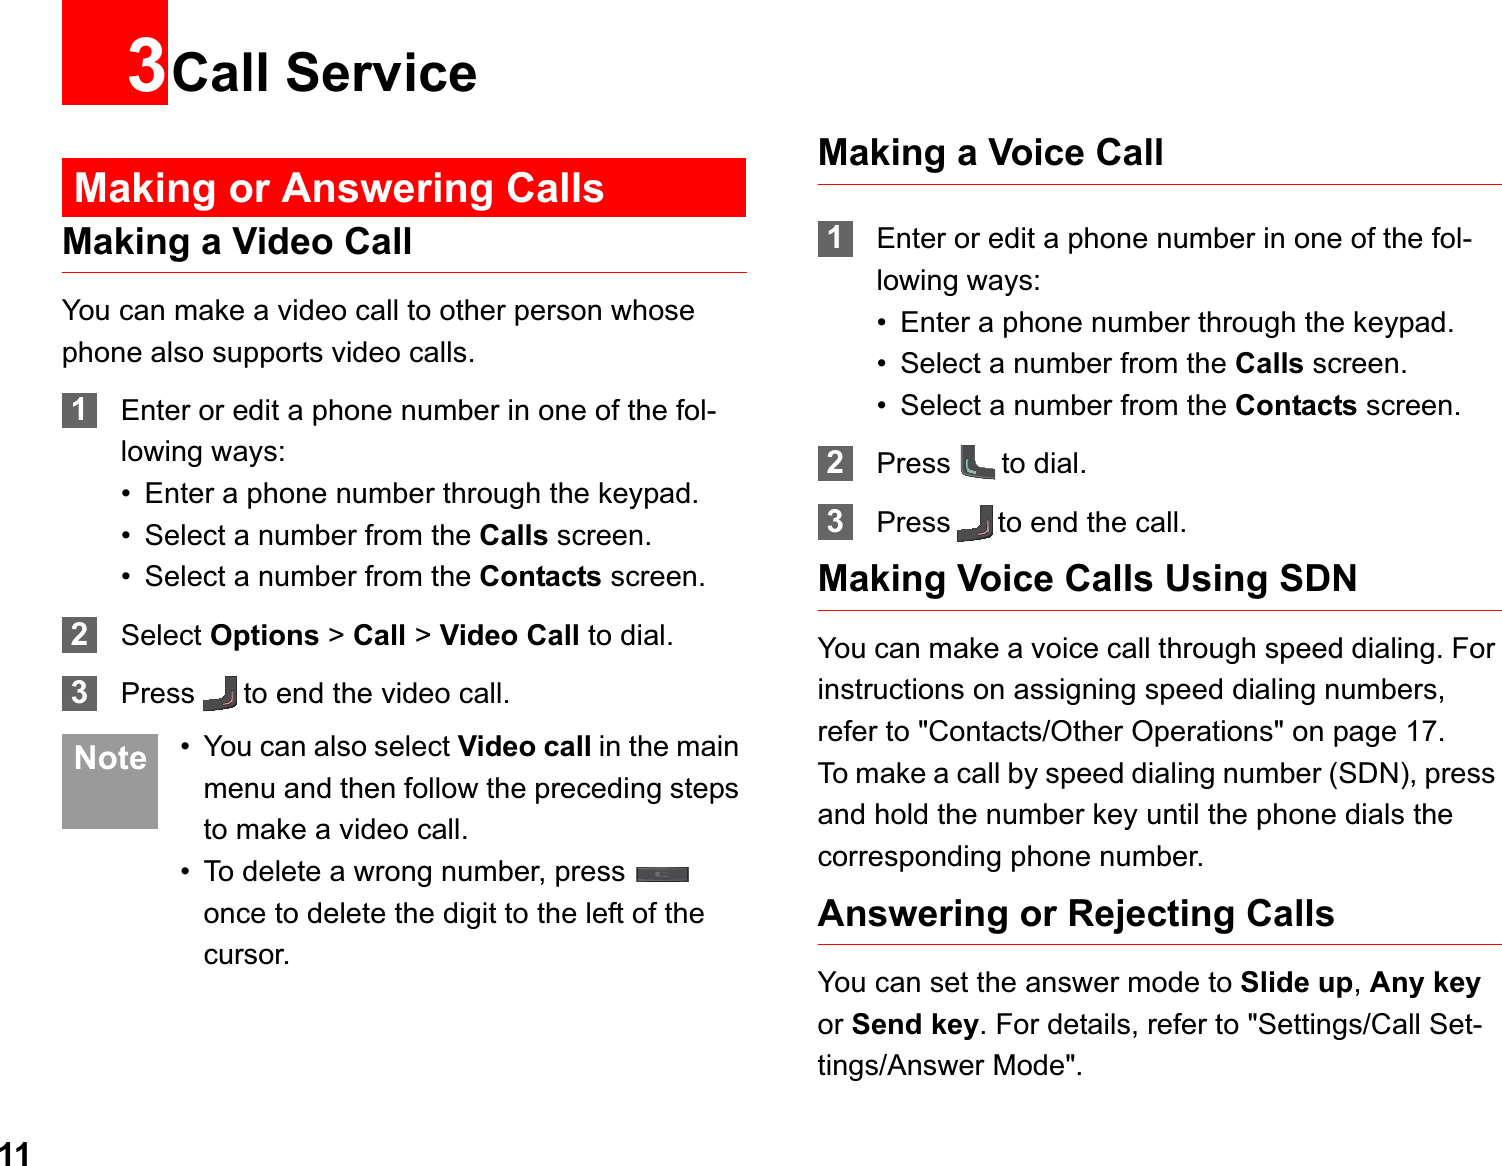 113Call ServiceMaking or Answering CallsMaking a Video CallYou can make a video call to other person whose phone also supports video calls.1Enter or edit a phone number in one of the fol-lowing ways:• Enter a phone number through the keypad.• Select a number from the Calls screen.• Select a number from the Contacts screen.2Select Options &gt; Call &gt; Video Call to dial.3Press to end the video call. Note • You can also select Video call in the main menu and then follow the preceding steps to make a video call.• To delete a wrong number, press   once to delete the digit to the left of the cursor. Making a Voice Call1Enter or edit a phone number in one of the fol-lowing ways:• Enter a phone number through the keypad.• Select a number from the Calls screen.• Select a number from the Contacts screen.2Press to dial.3Press to end the call.Making Voice Calls Using SDNYou can make a voice call through speed dialing. For instructions on assigning speed dialing numbers, refer to &quot;Contacts/Other Operations&quot; on page 17.To make a call by speed dialing number (SDN), press and hold the number key until the phone dials the corresponding phone number.Answering or Rejecting CallsYou can set the answer mode to Slide up,Any keyor Send key. For details, refer to &quot;Settings/Call Set-tings/Answer Mode&quot;.